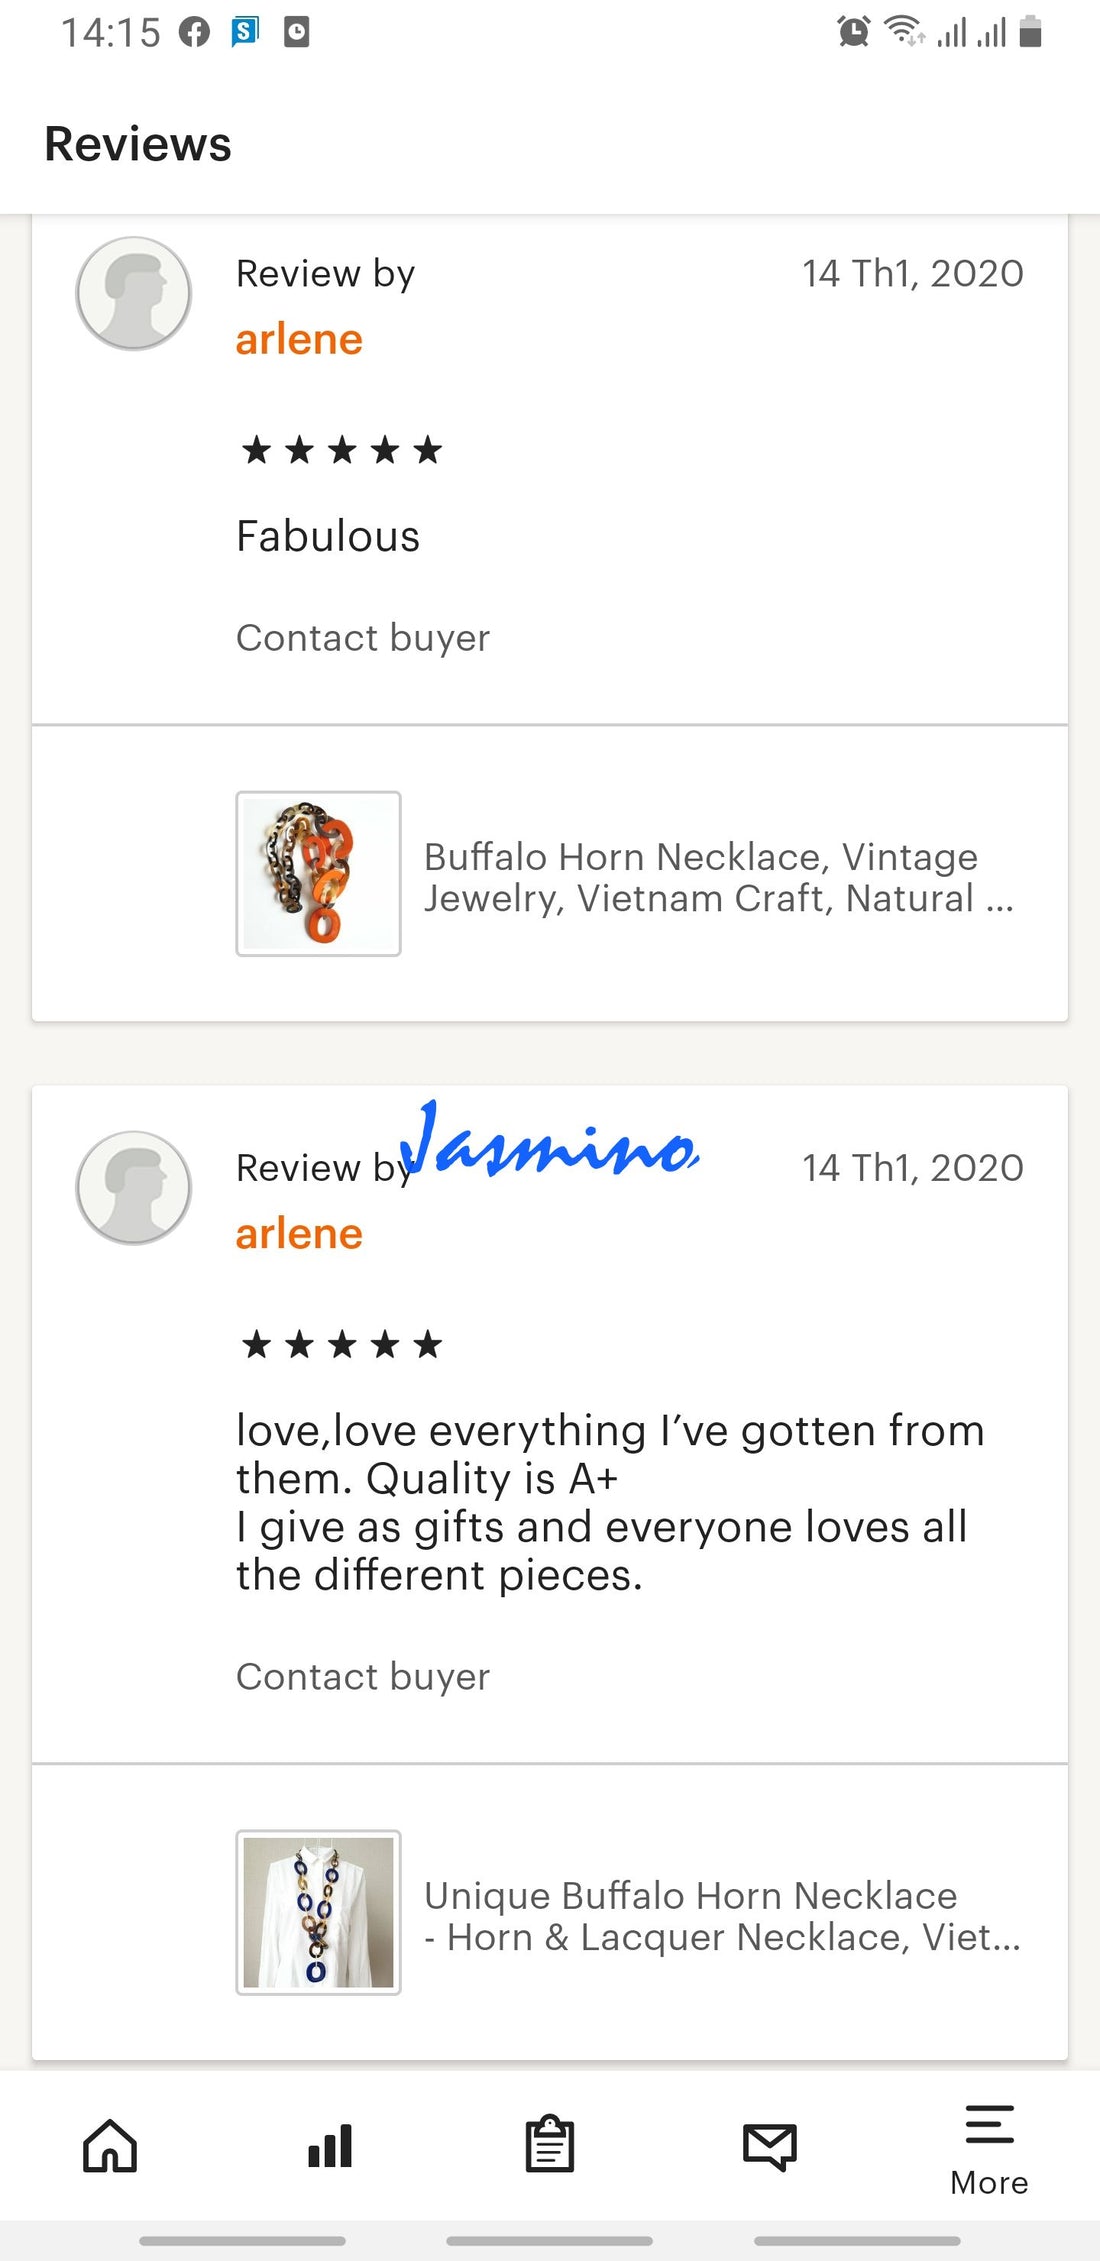 It shows positive feedback from two customers for a jewelry collection in a handmade accessory shop